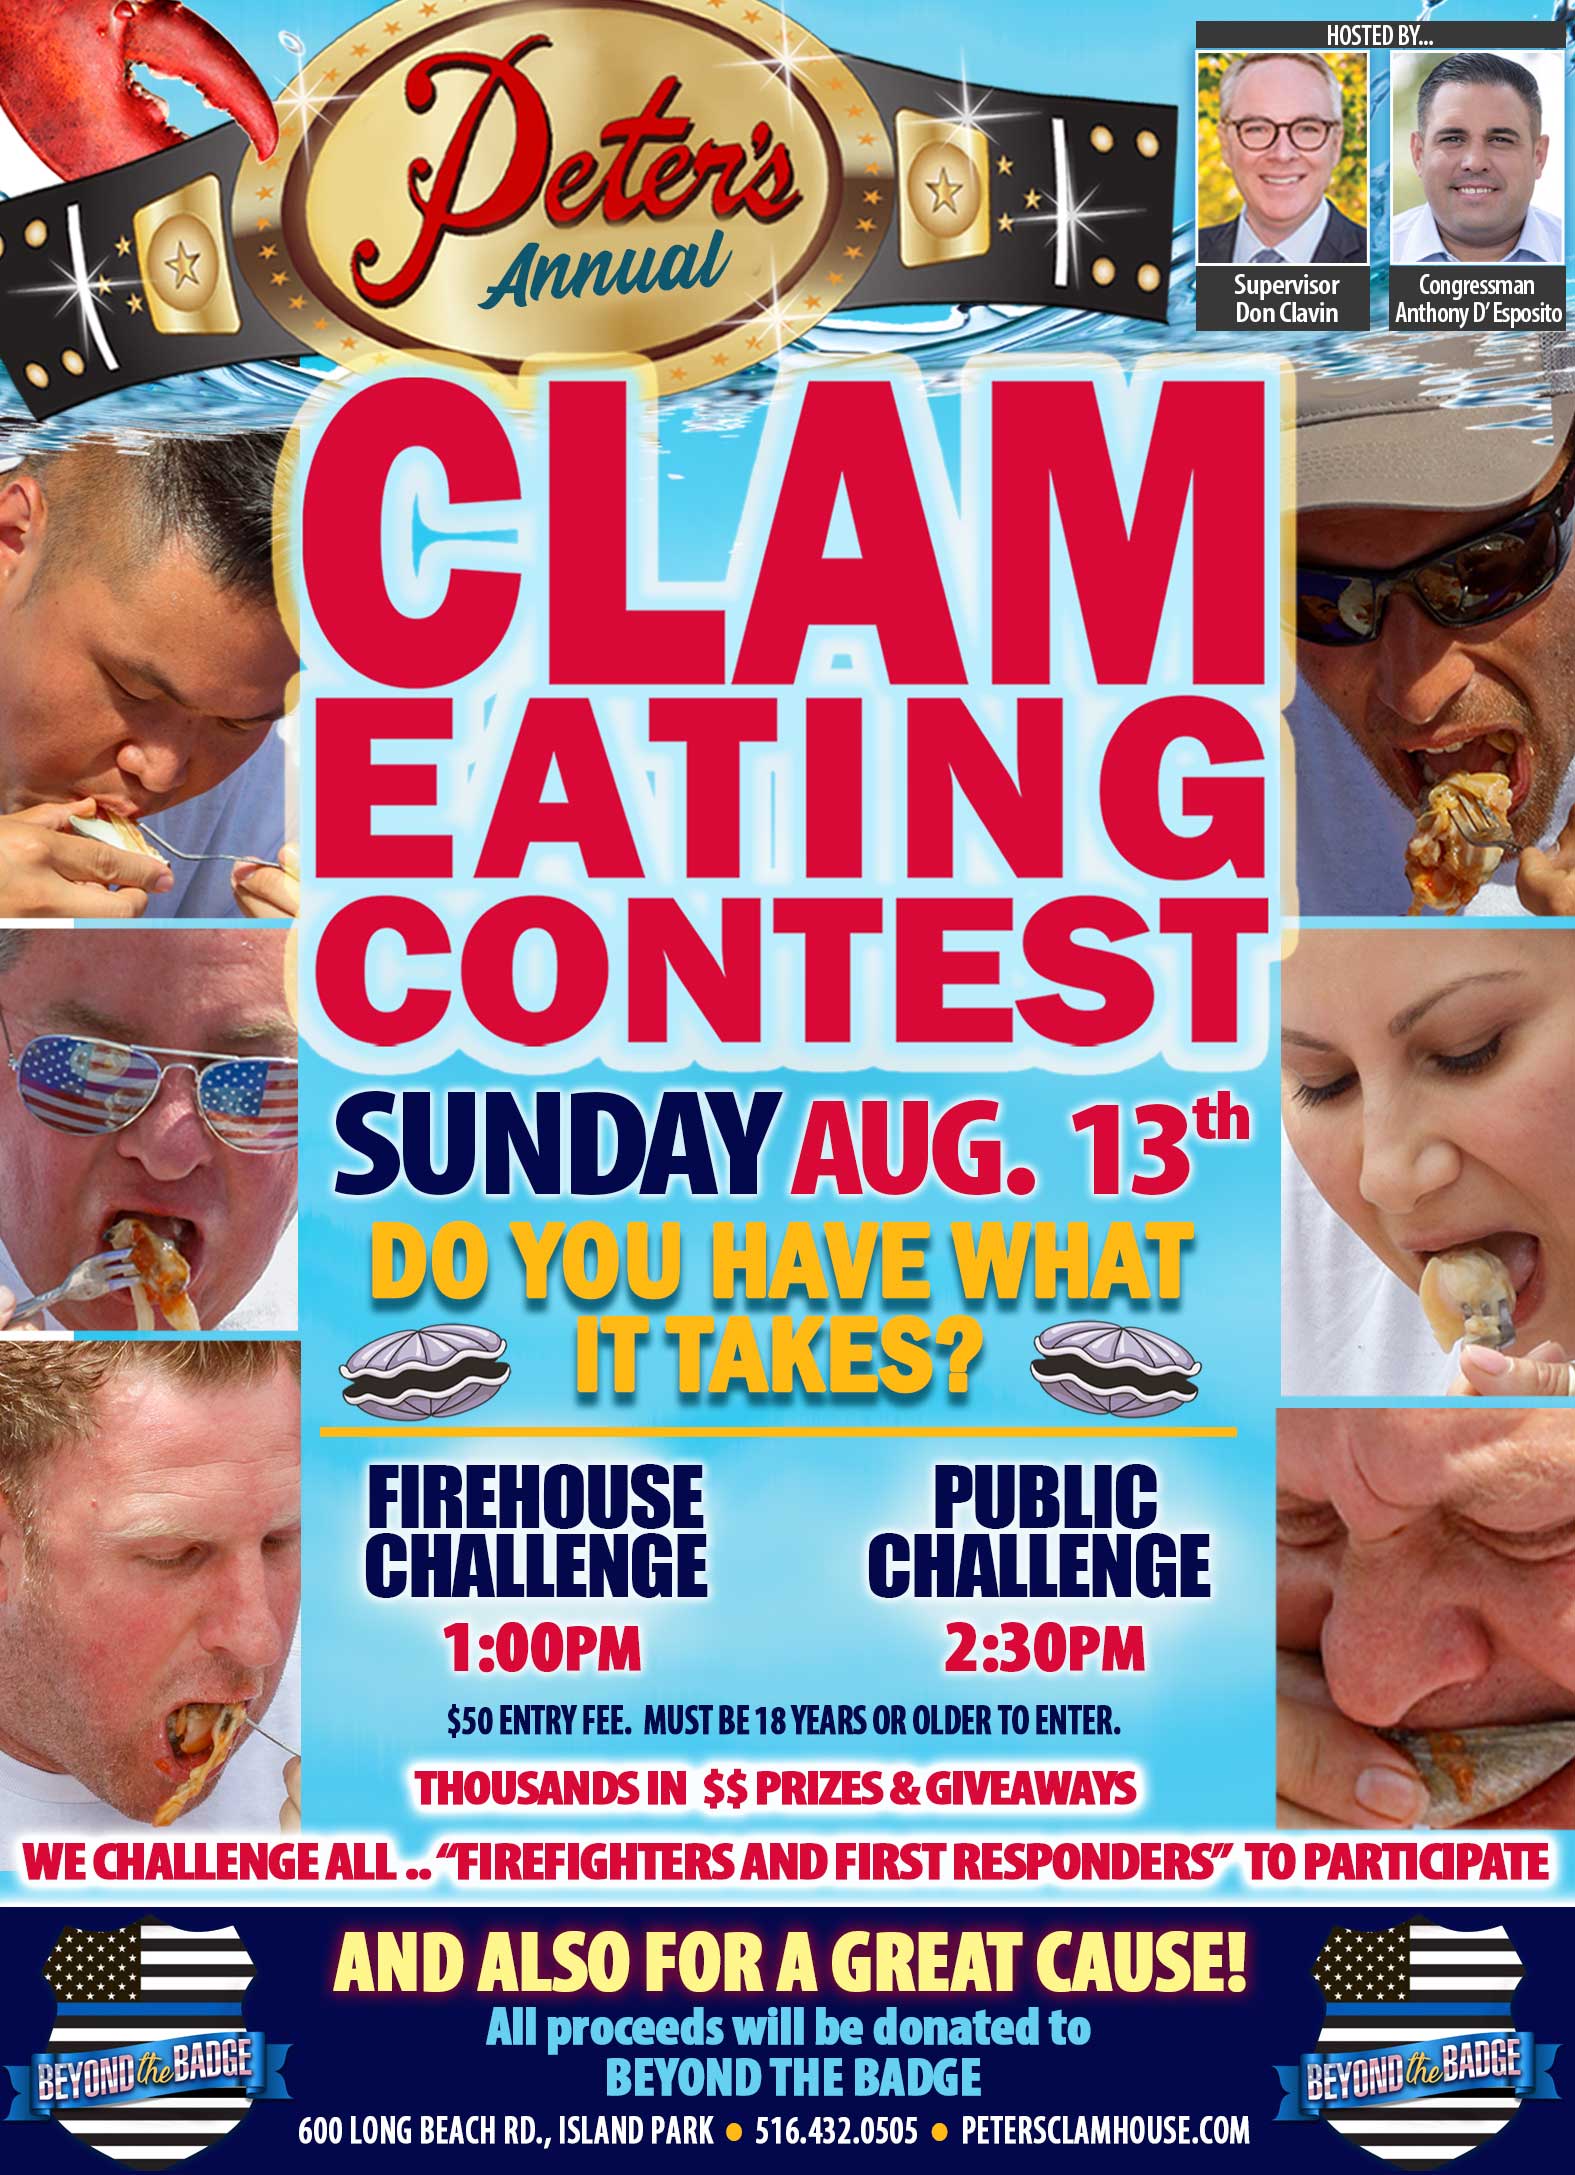 Peters Clam Eating Contest